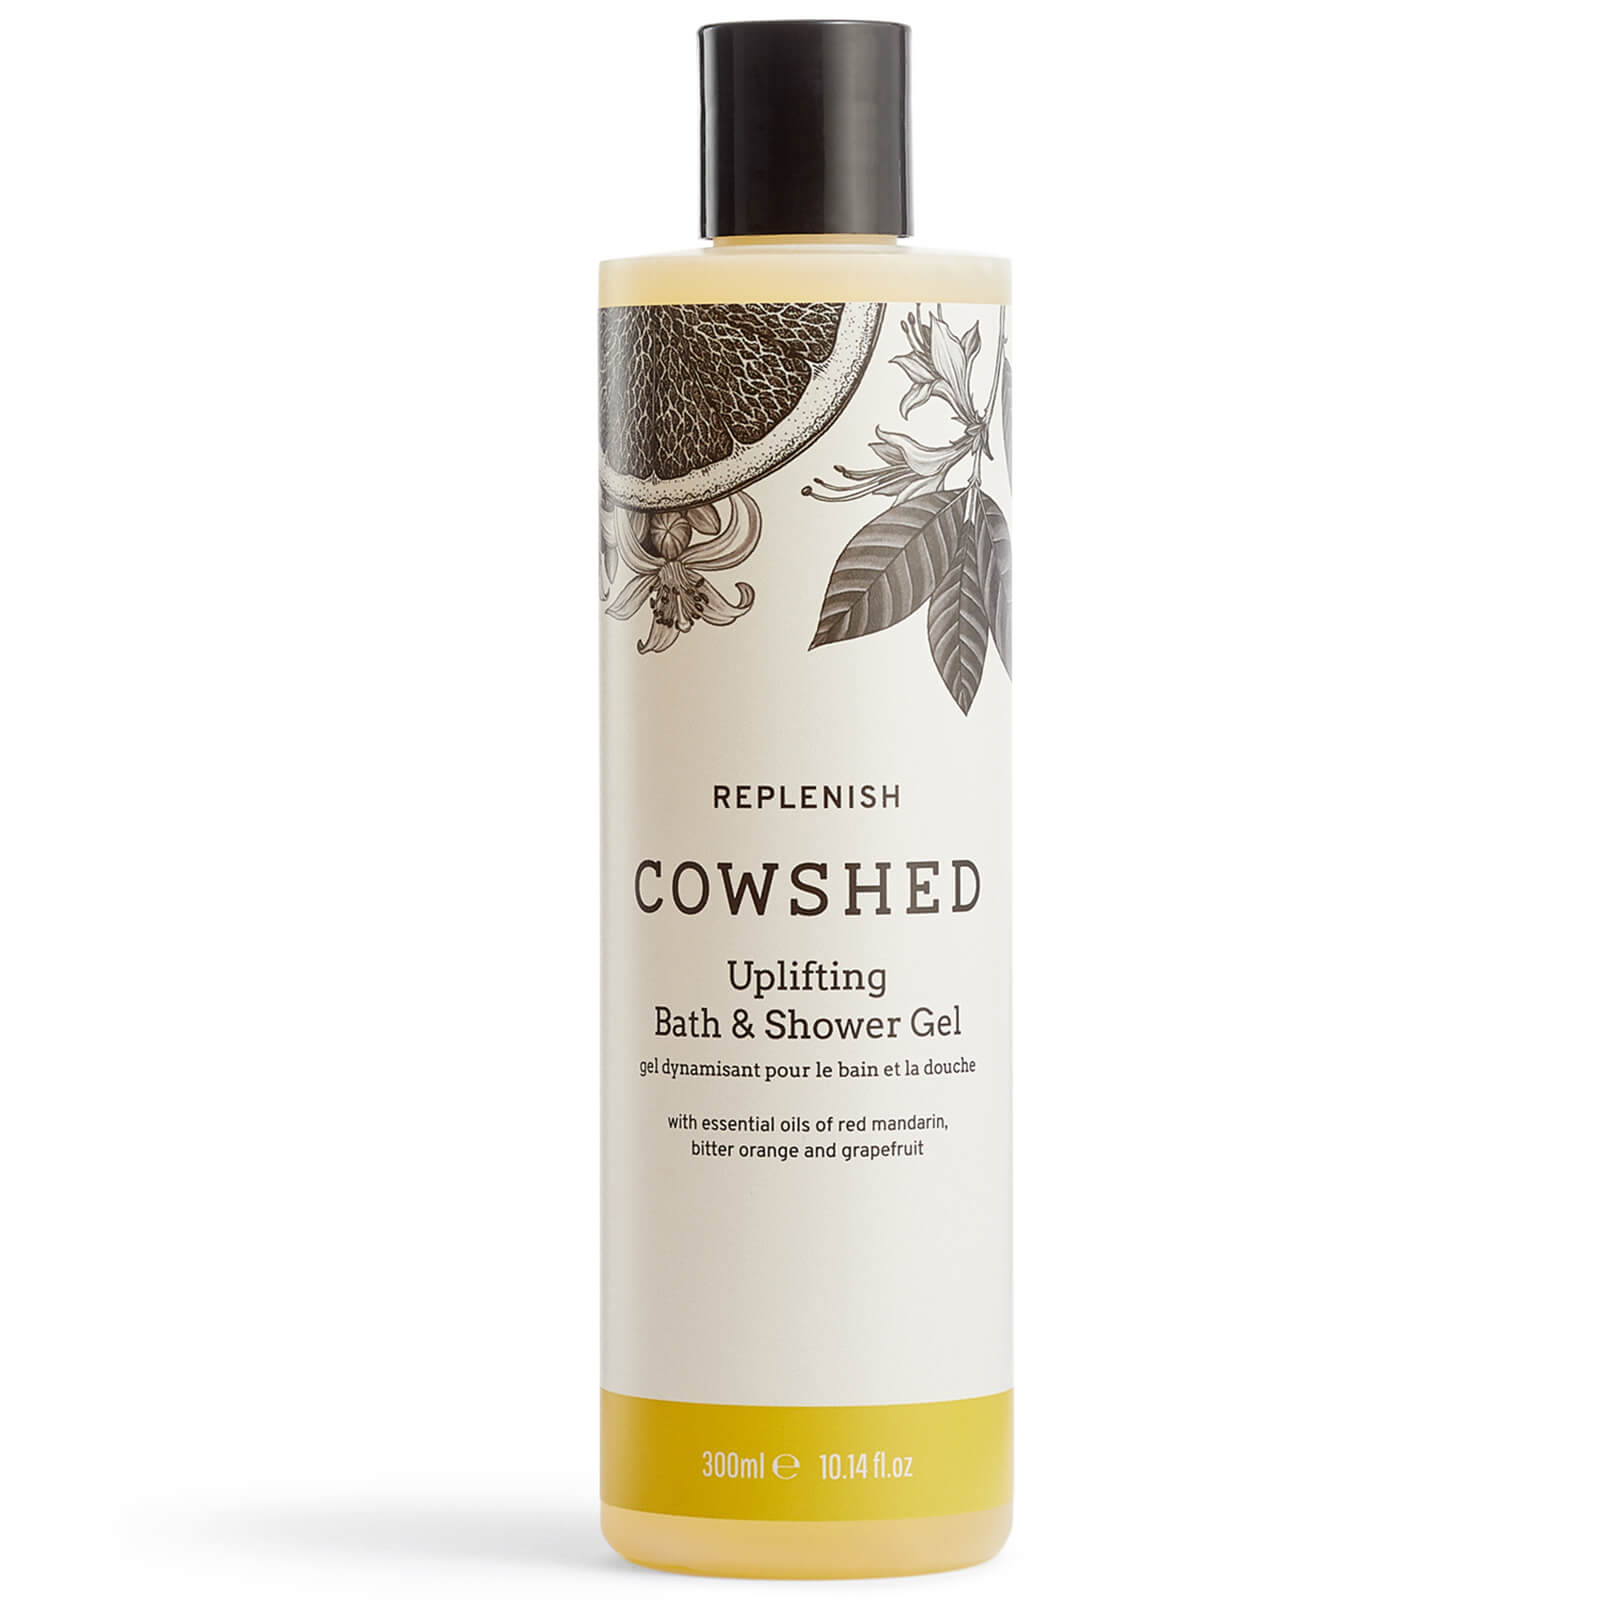 Cowshed Replenish Uplifting Bath And Shower Gel 300ml